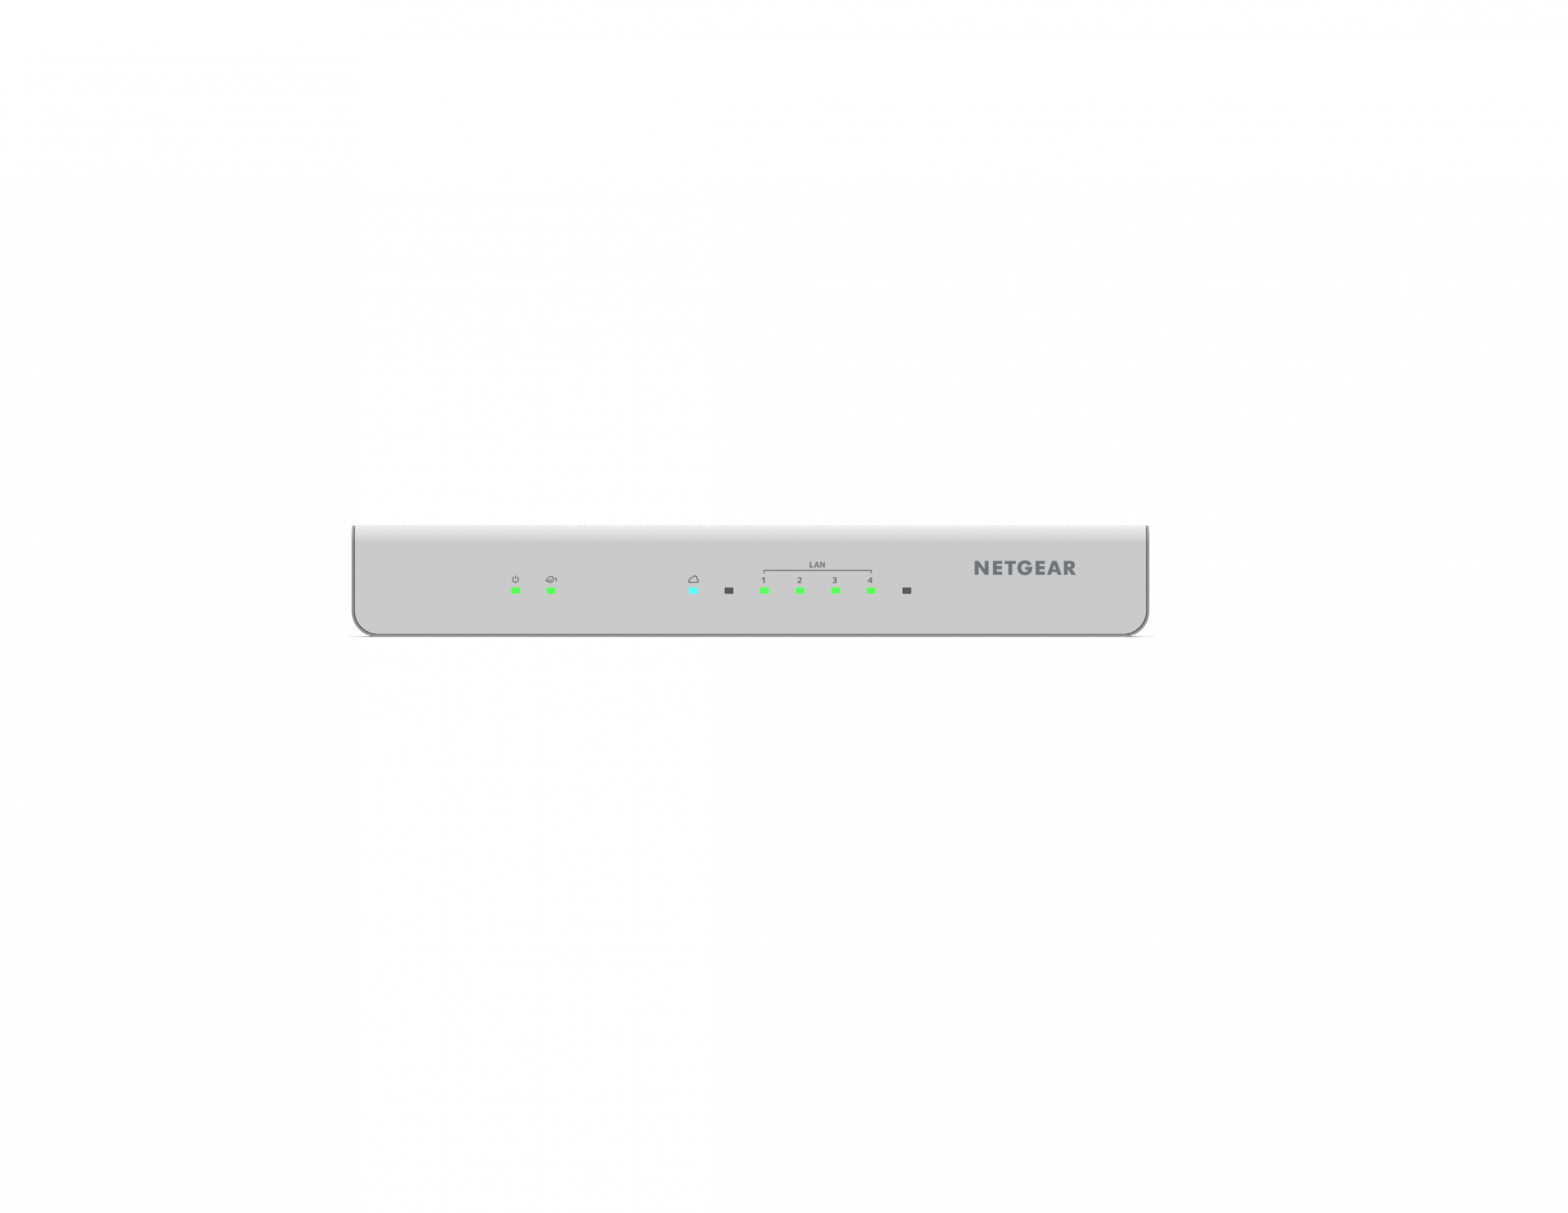 NETGEAR Insight Managed Business Router Installation Guide